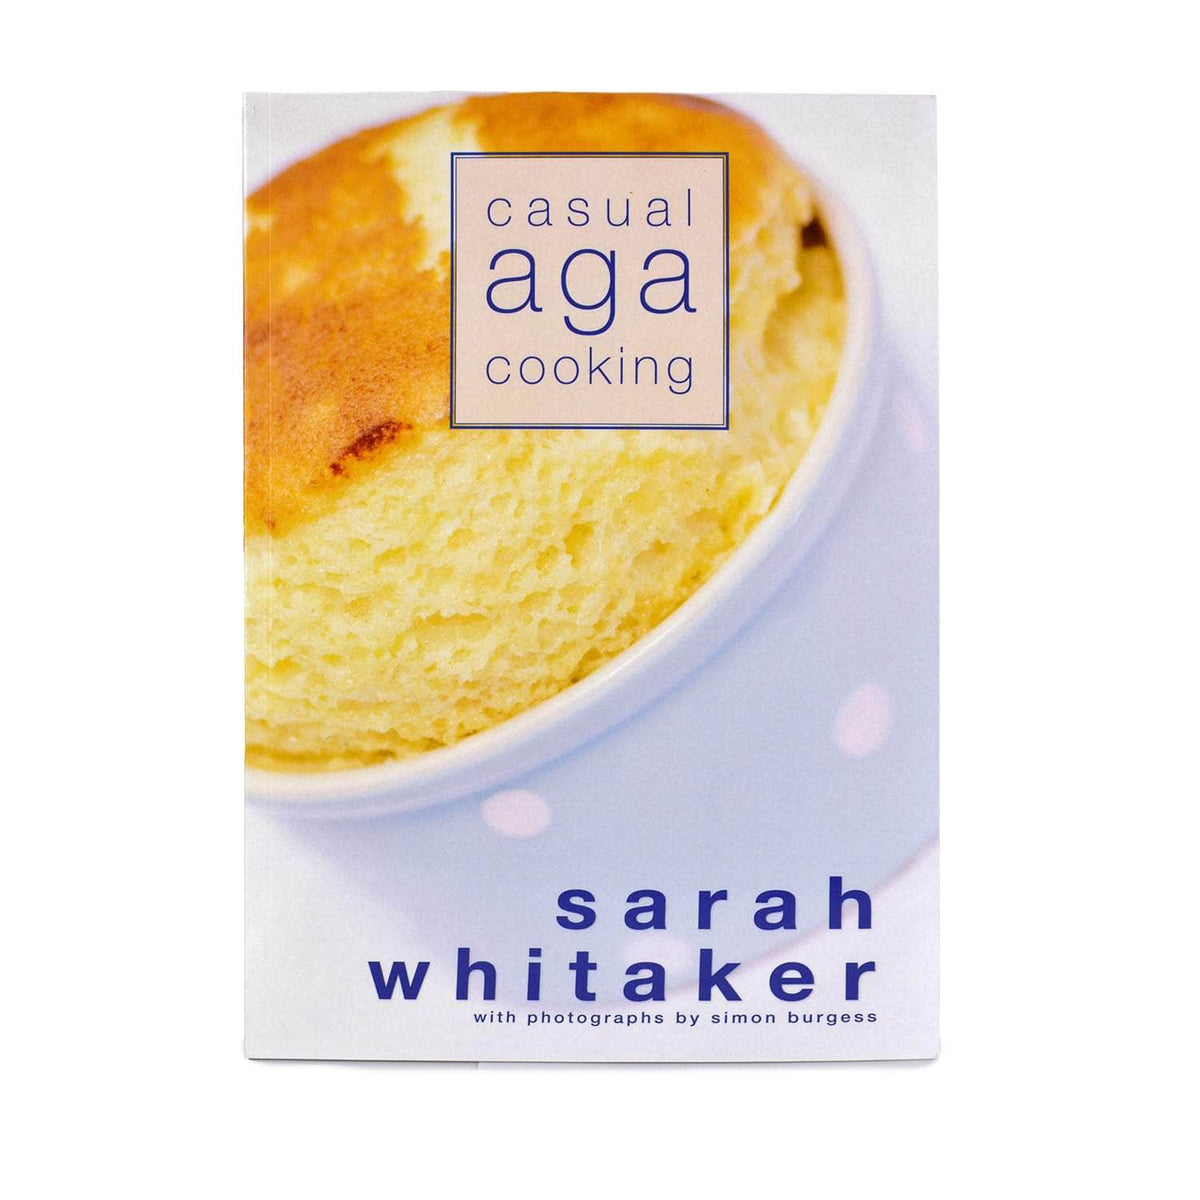 &#39;Casual Aga cooking&#39; - cookbook by Sarah Whitaker